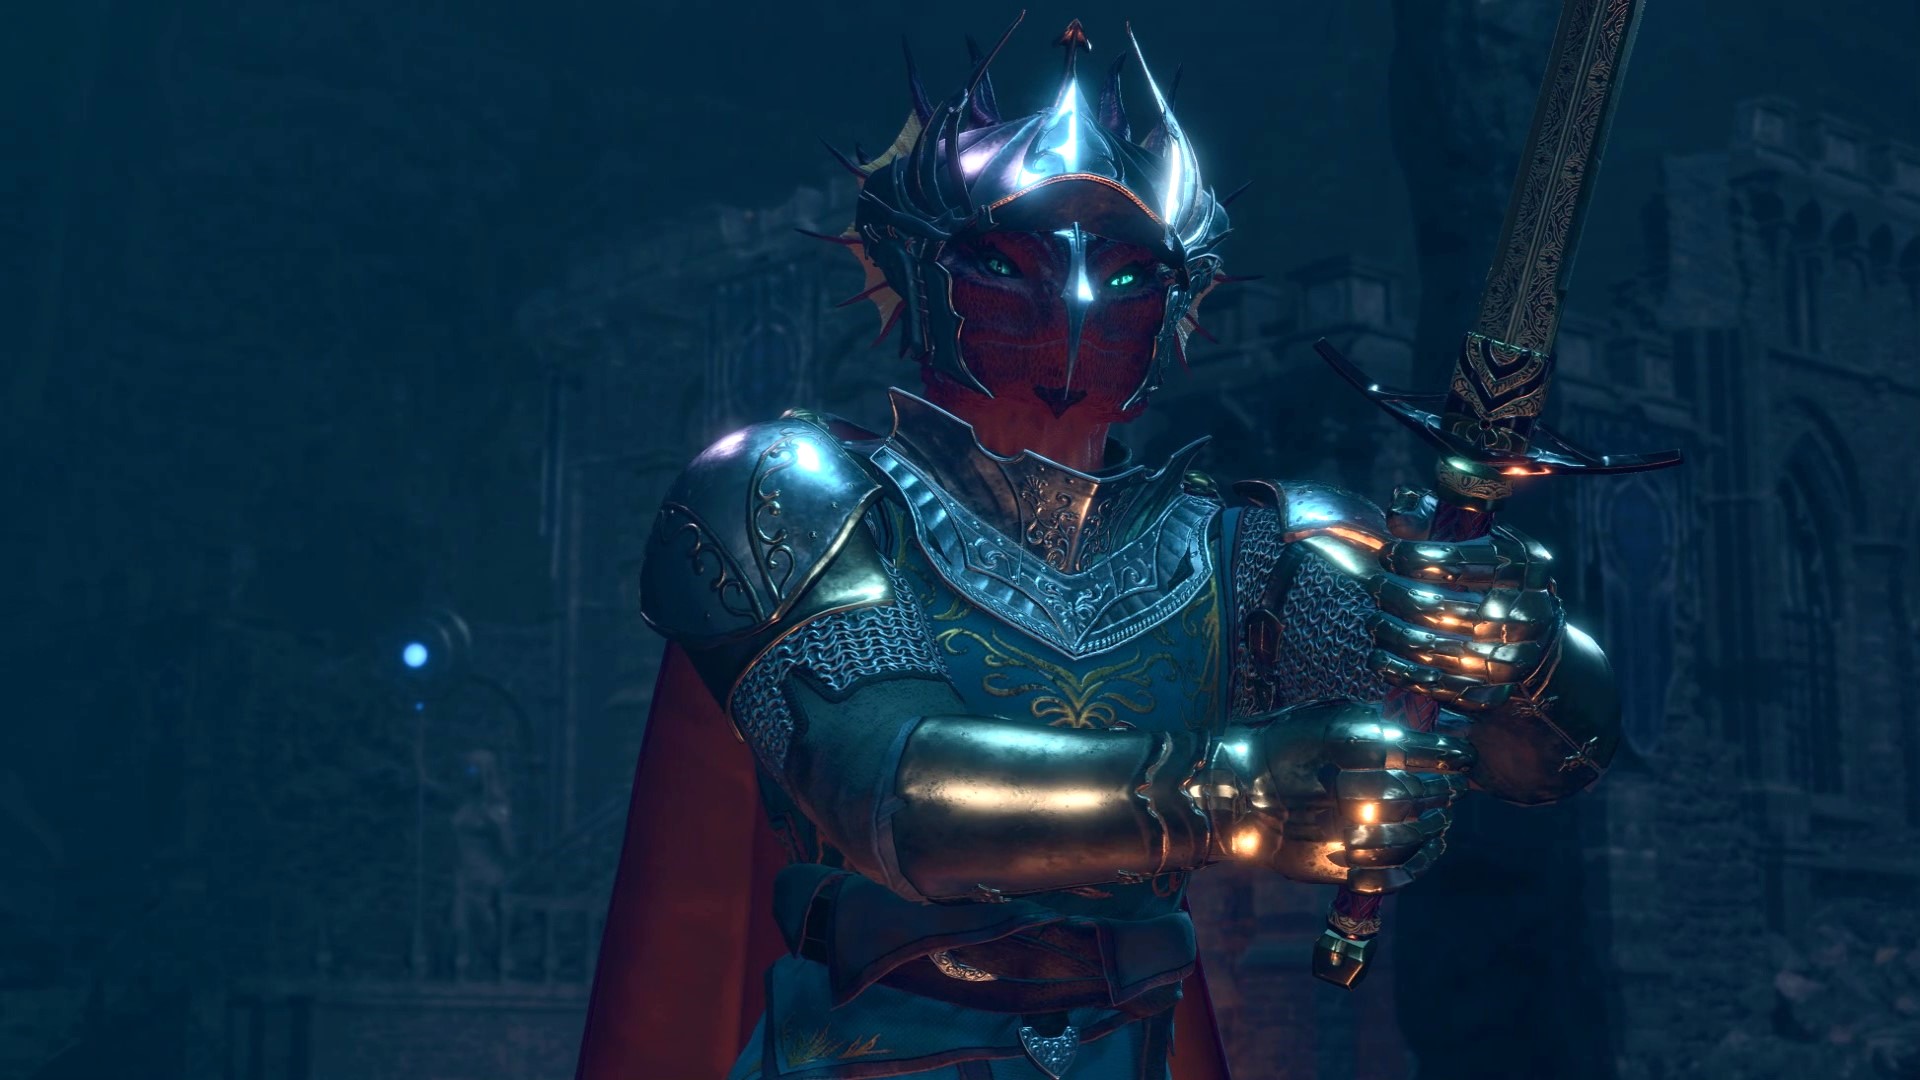 Gears 5 Co-op Has a 3 Player Option with Puzzling yet Realistic Reasons